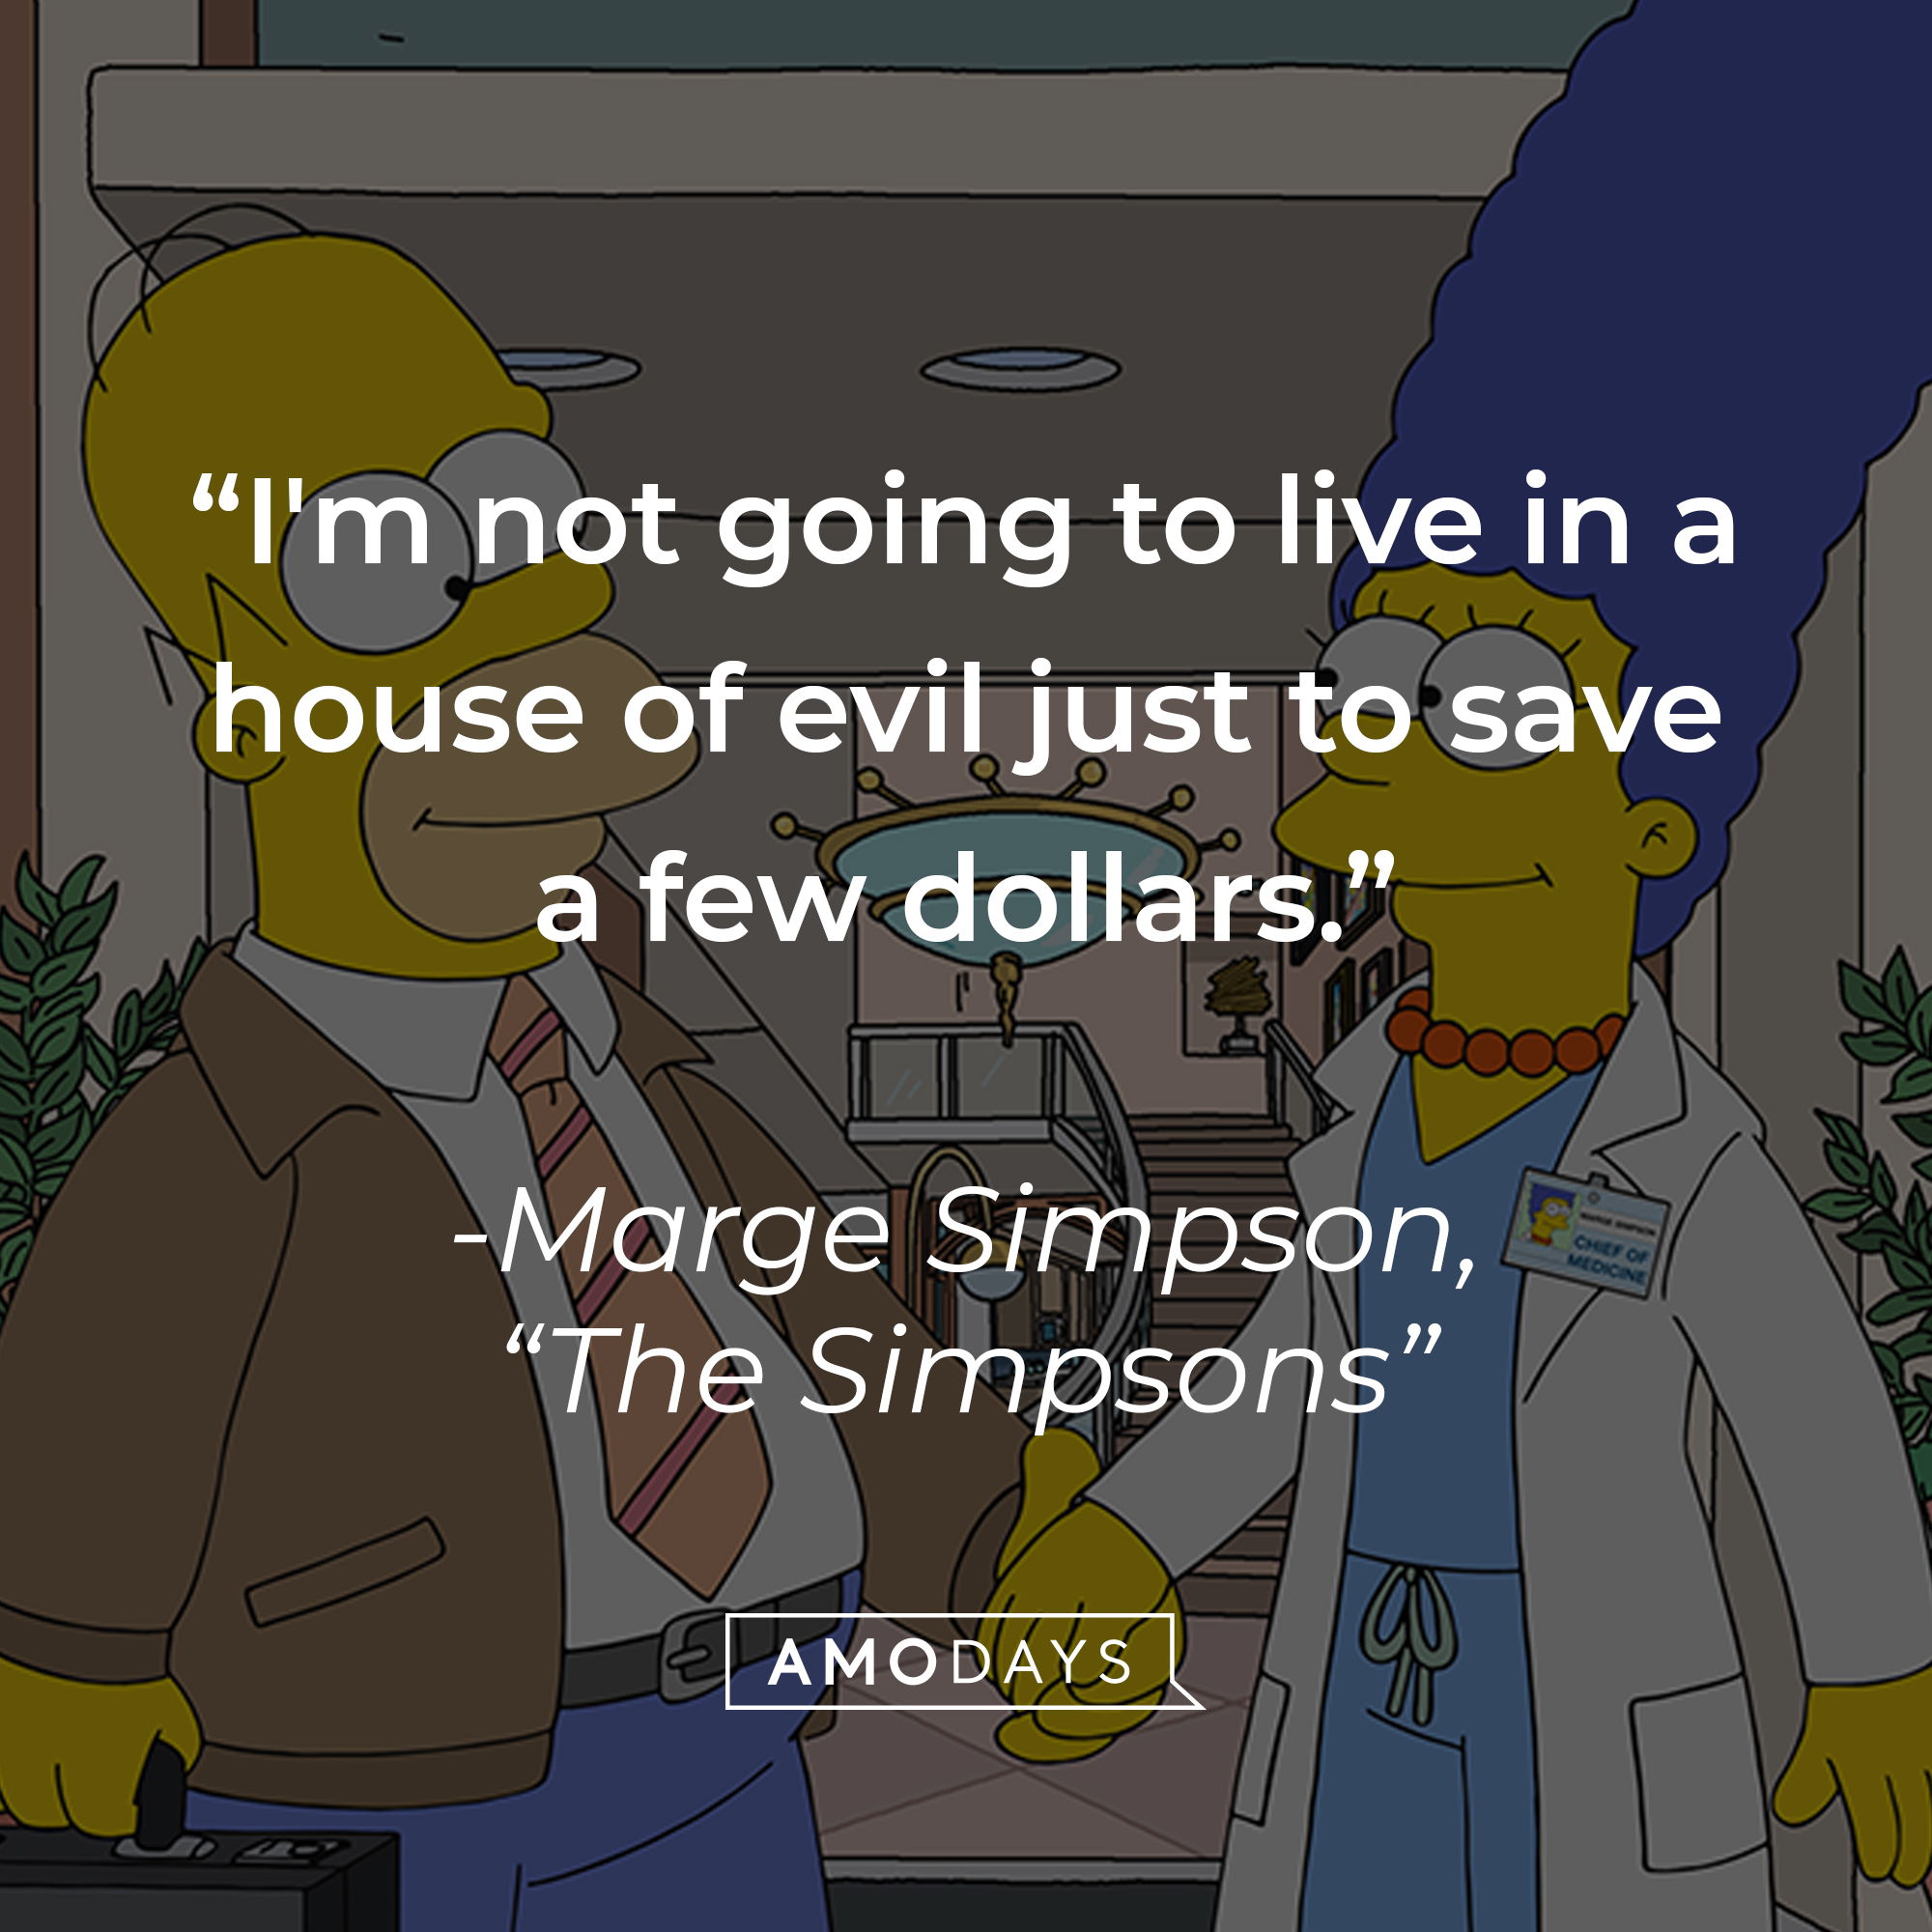 Marge Simpson's quote: "I'm not going to live in a house of evil just to save a few dollars." | Image: facebook.com/TheSimpsons